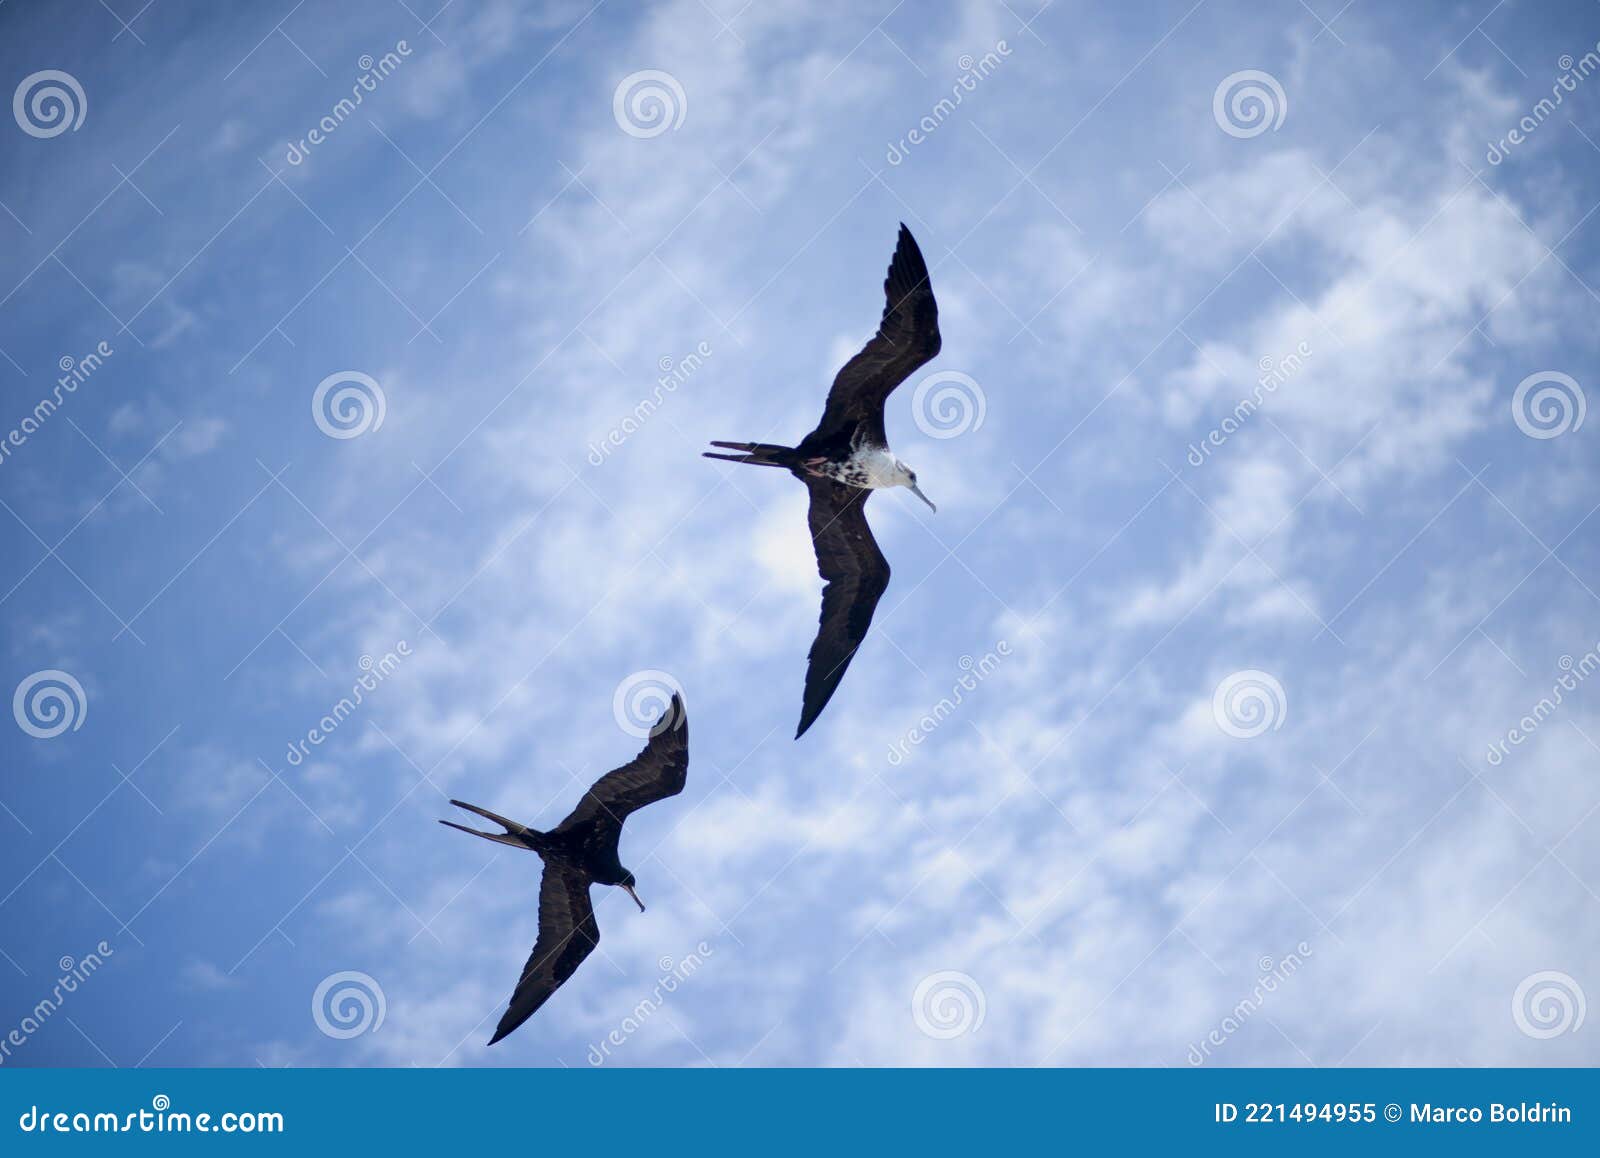 a couple of frigate bird in flight, mexico